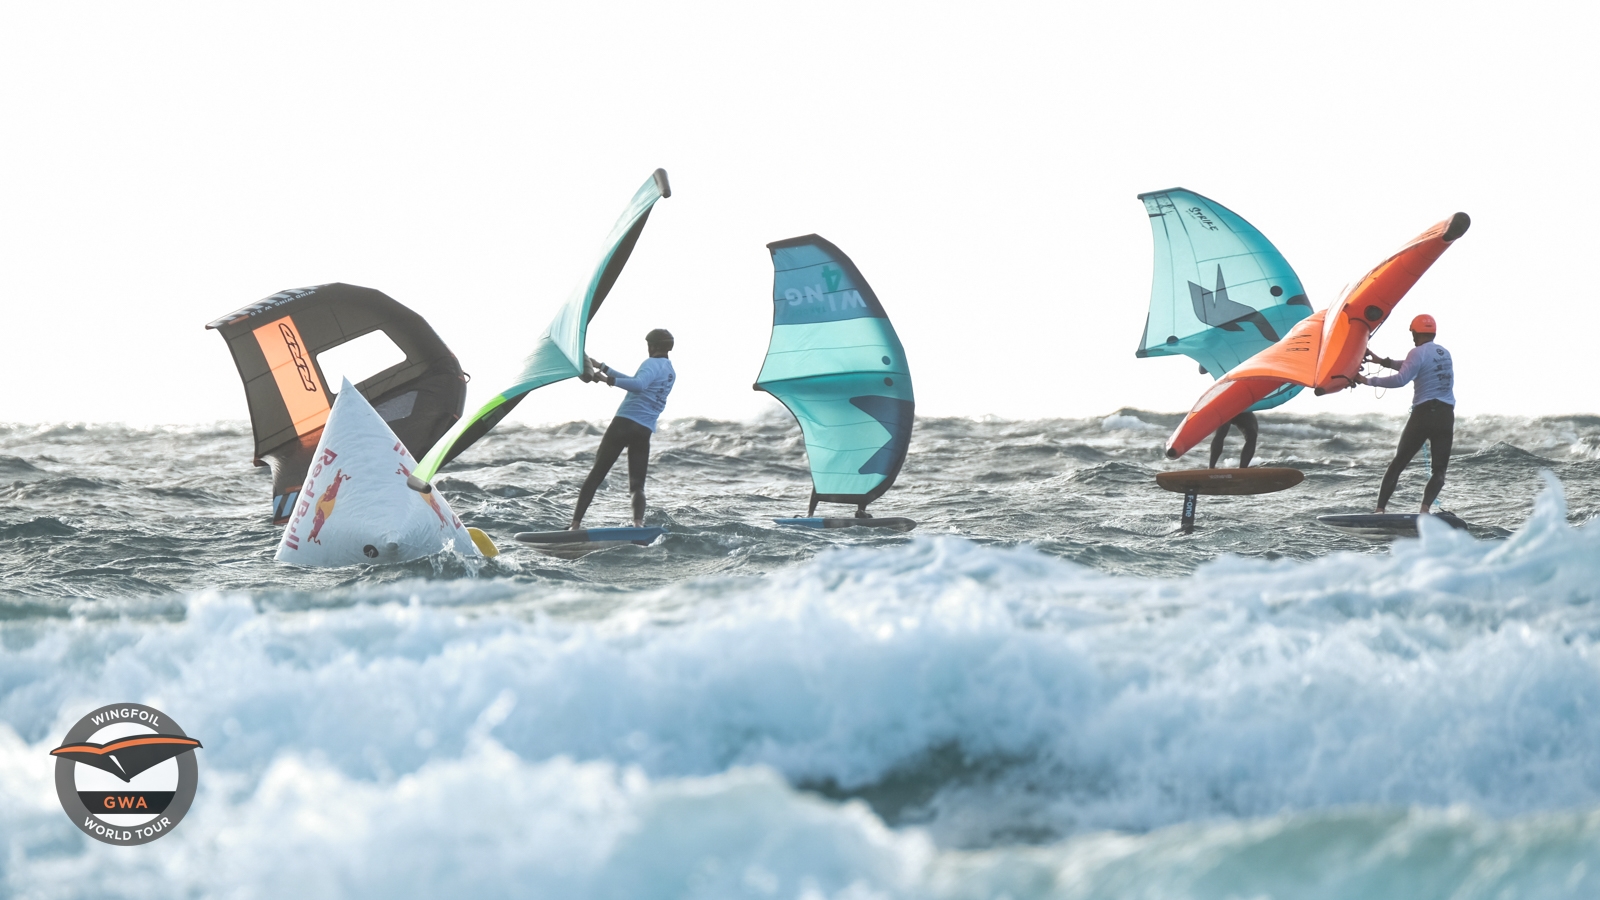  WingFoil  World Tour 2020  Tarifa ESP  Course Race with Freestylers on top as well